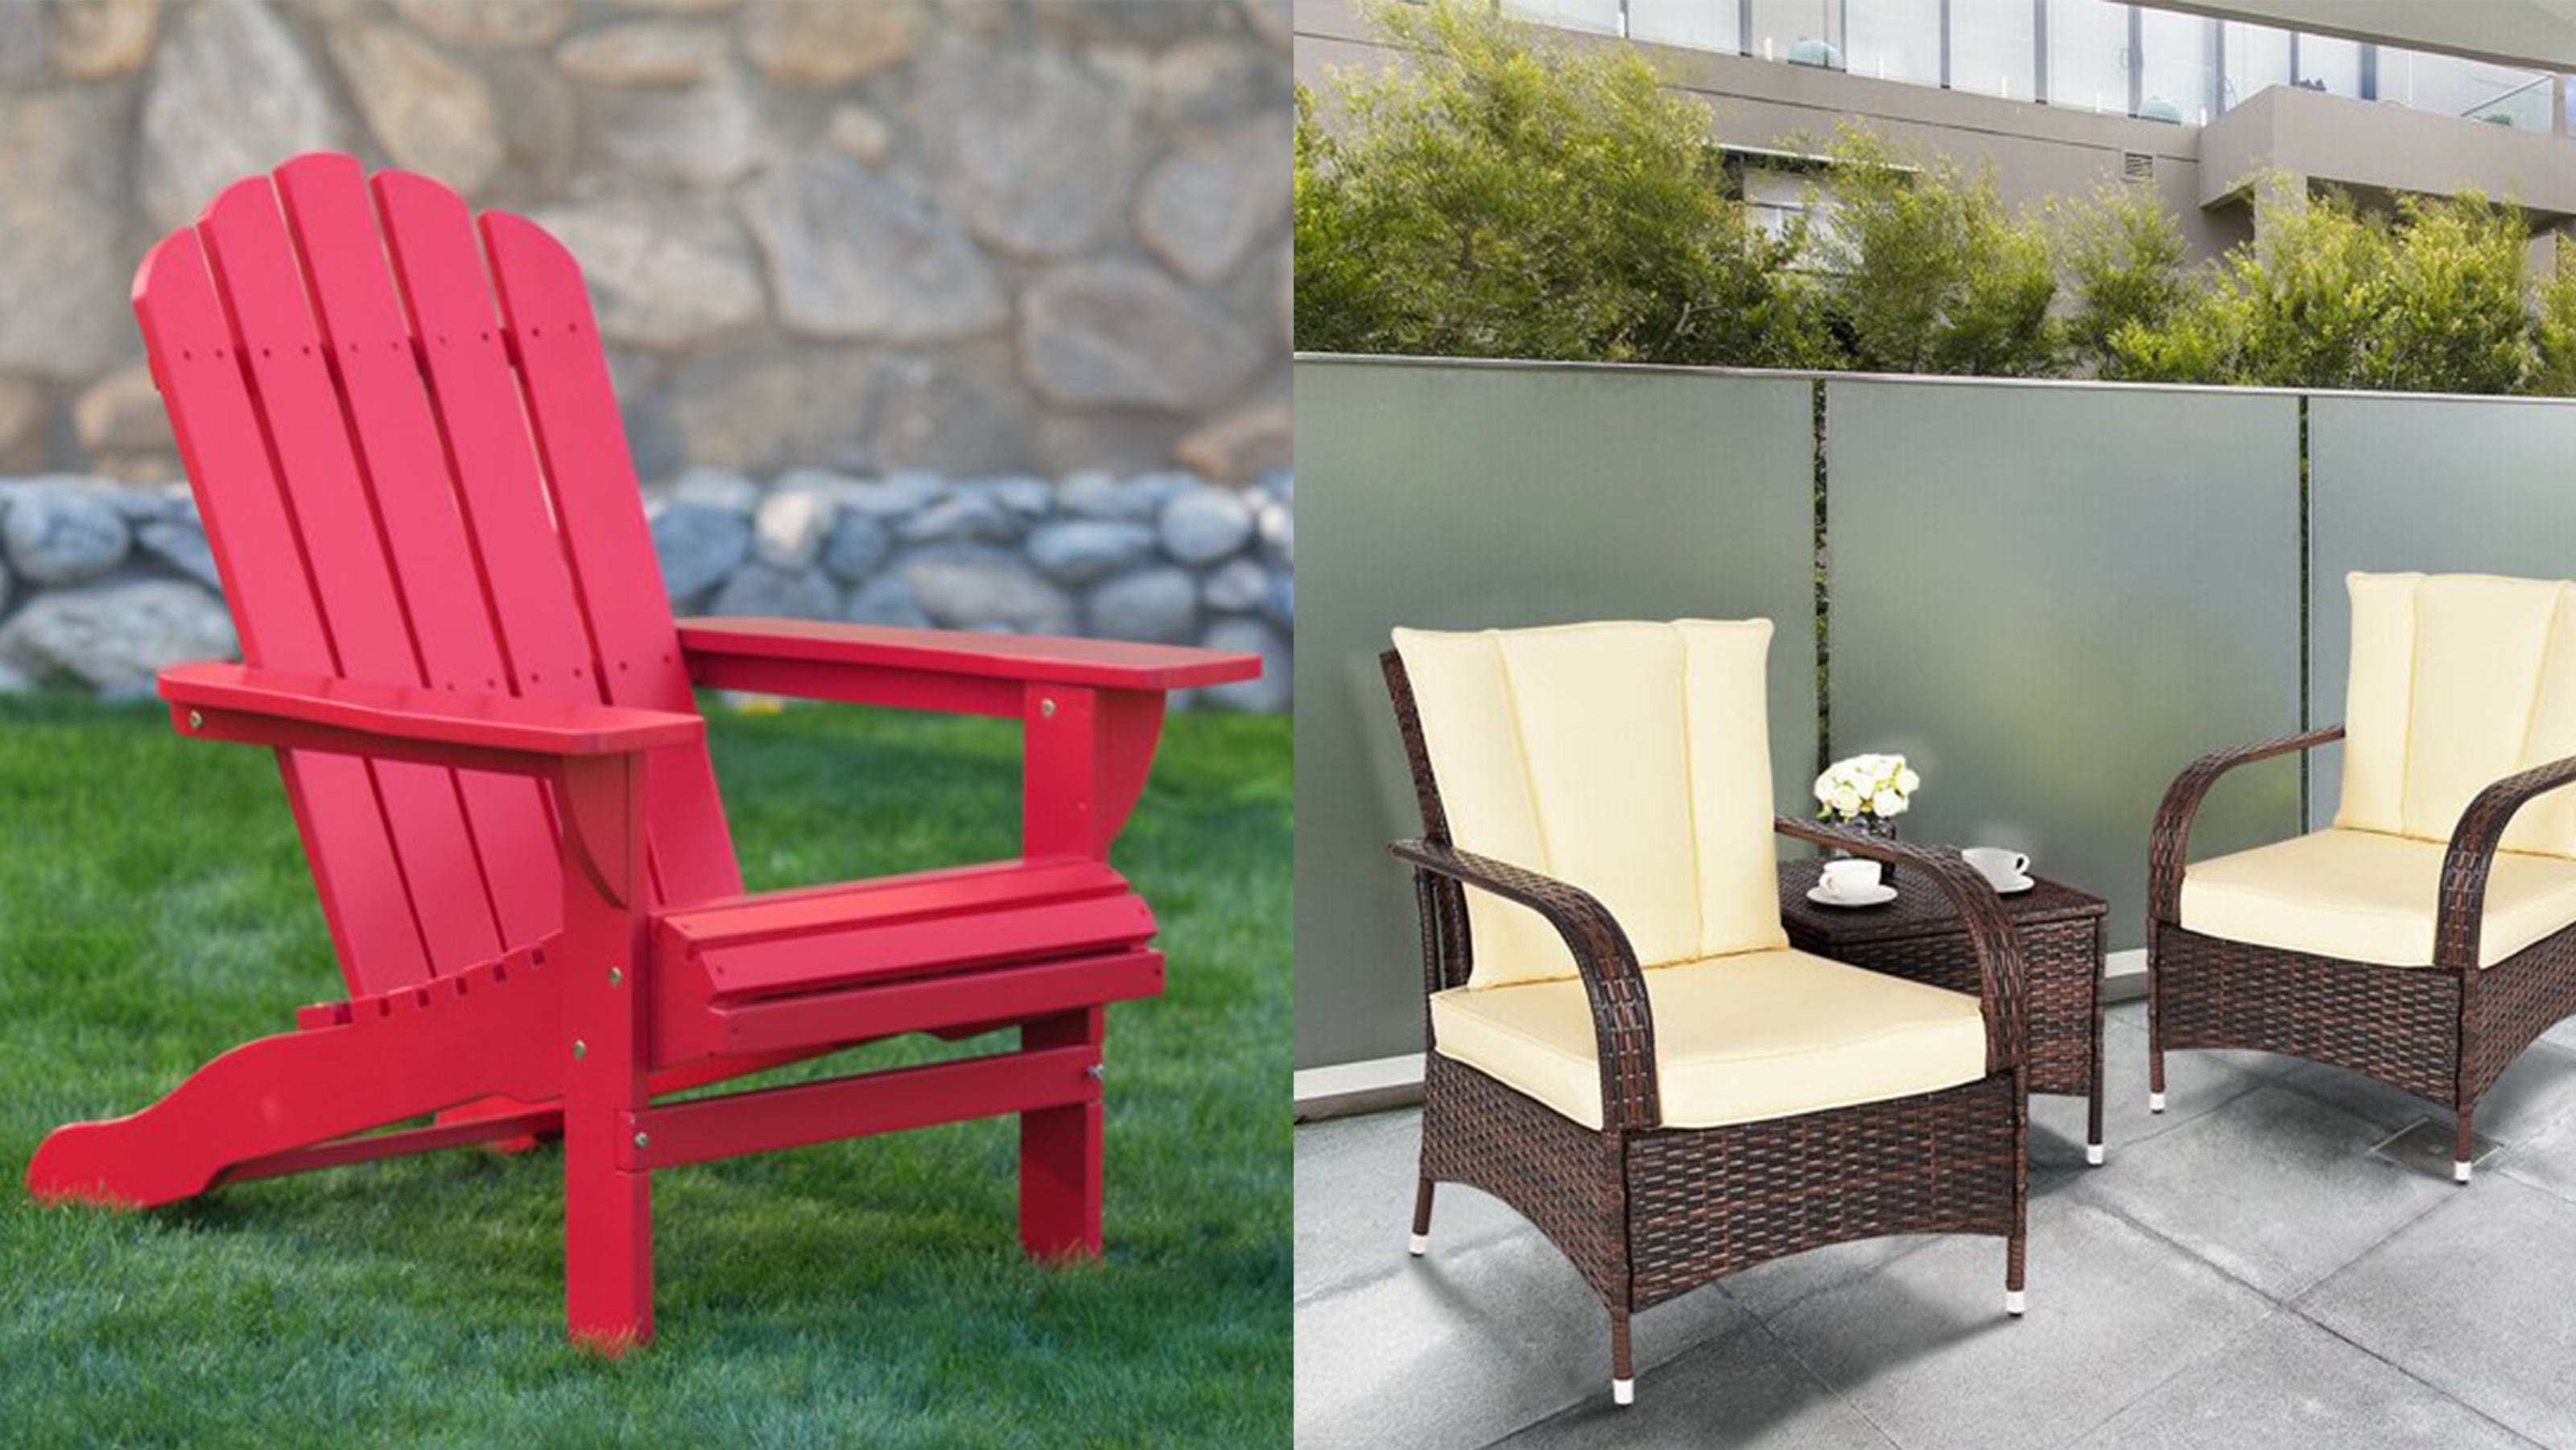 Patio furniture sale: Save up to 40% on outdoor pieces at Walmart